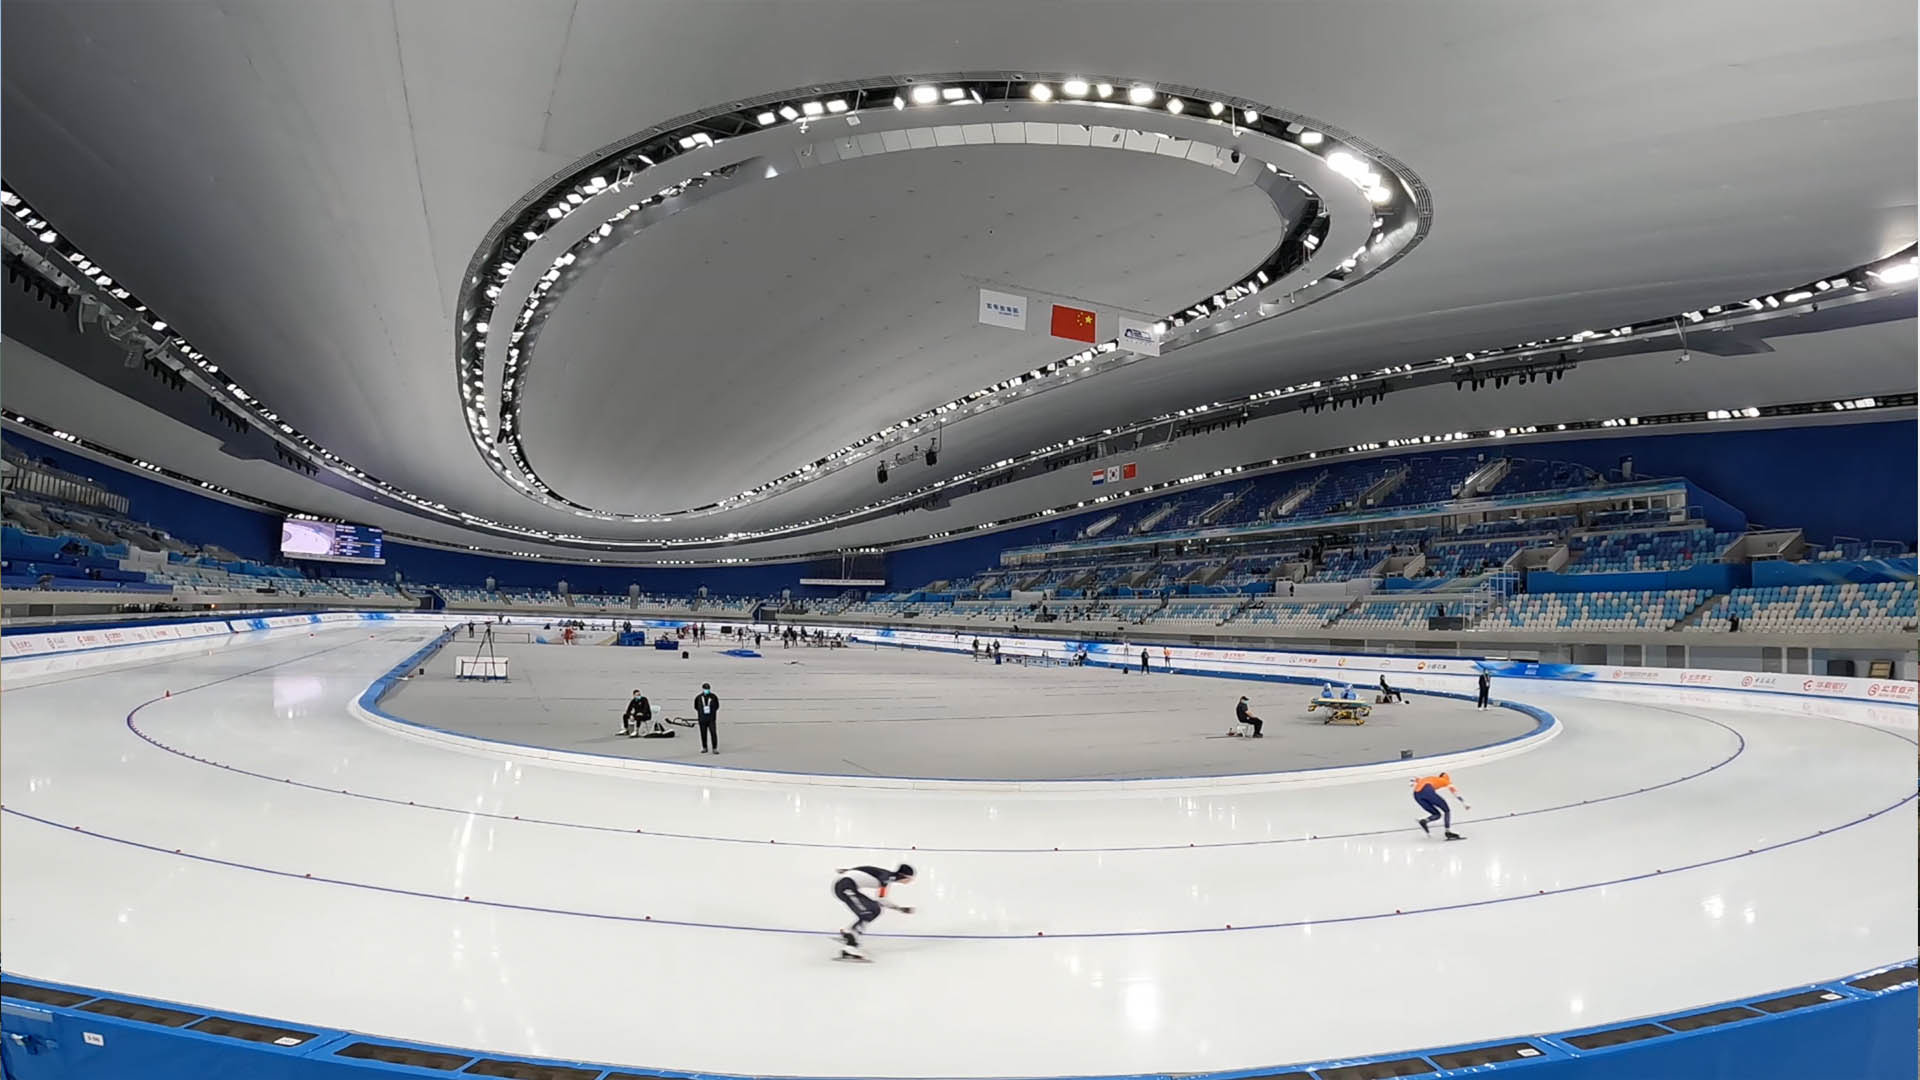 Speed Skating: Athletes' competition, Women's 1500 m final, Speed Skating China Open, Beijing, China. 1920x1080 Full HD Wallpaper.